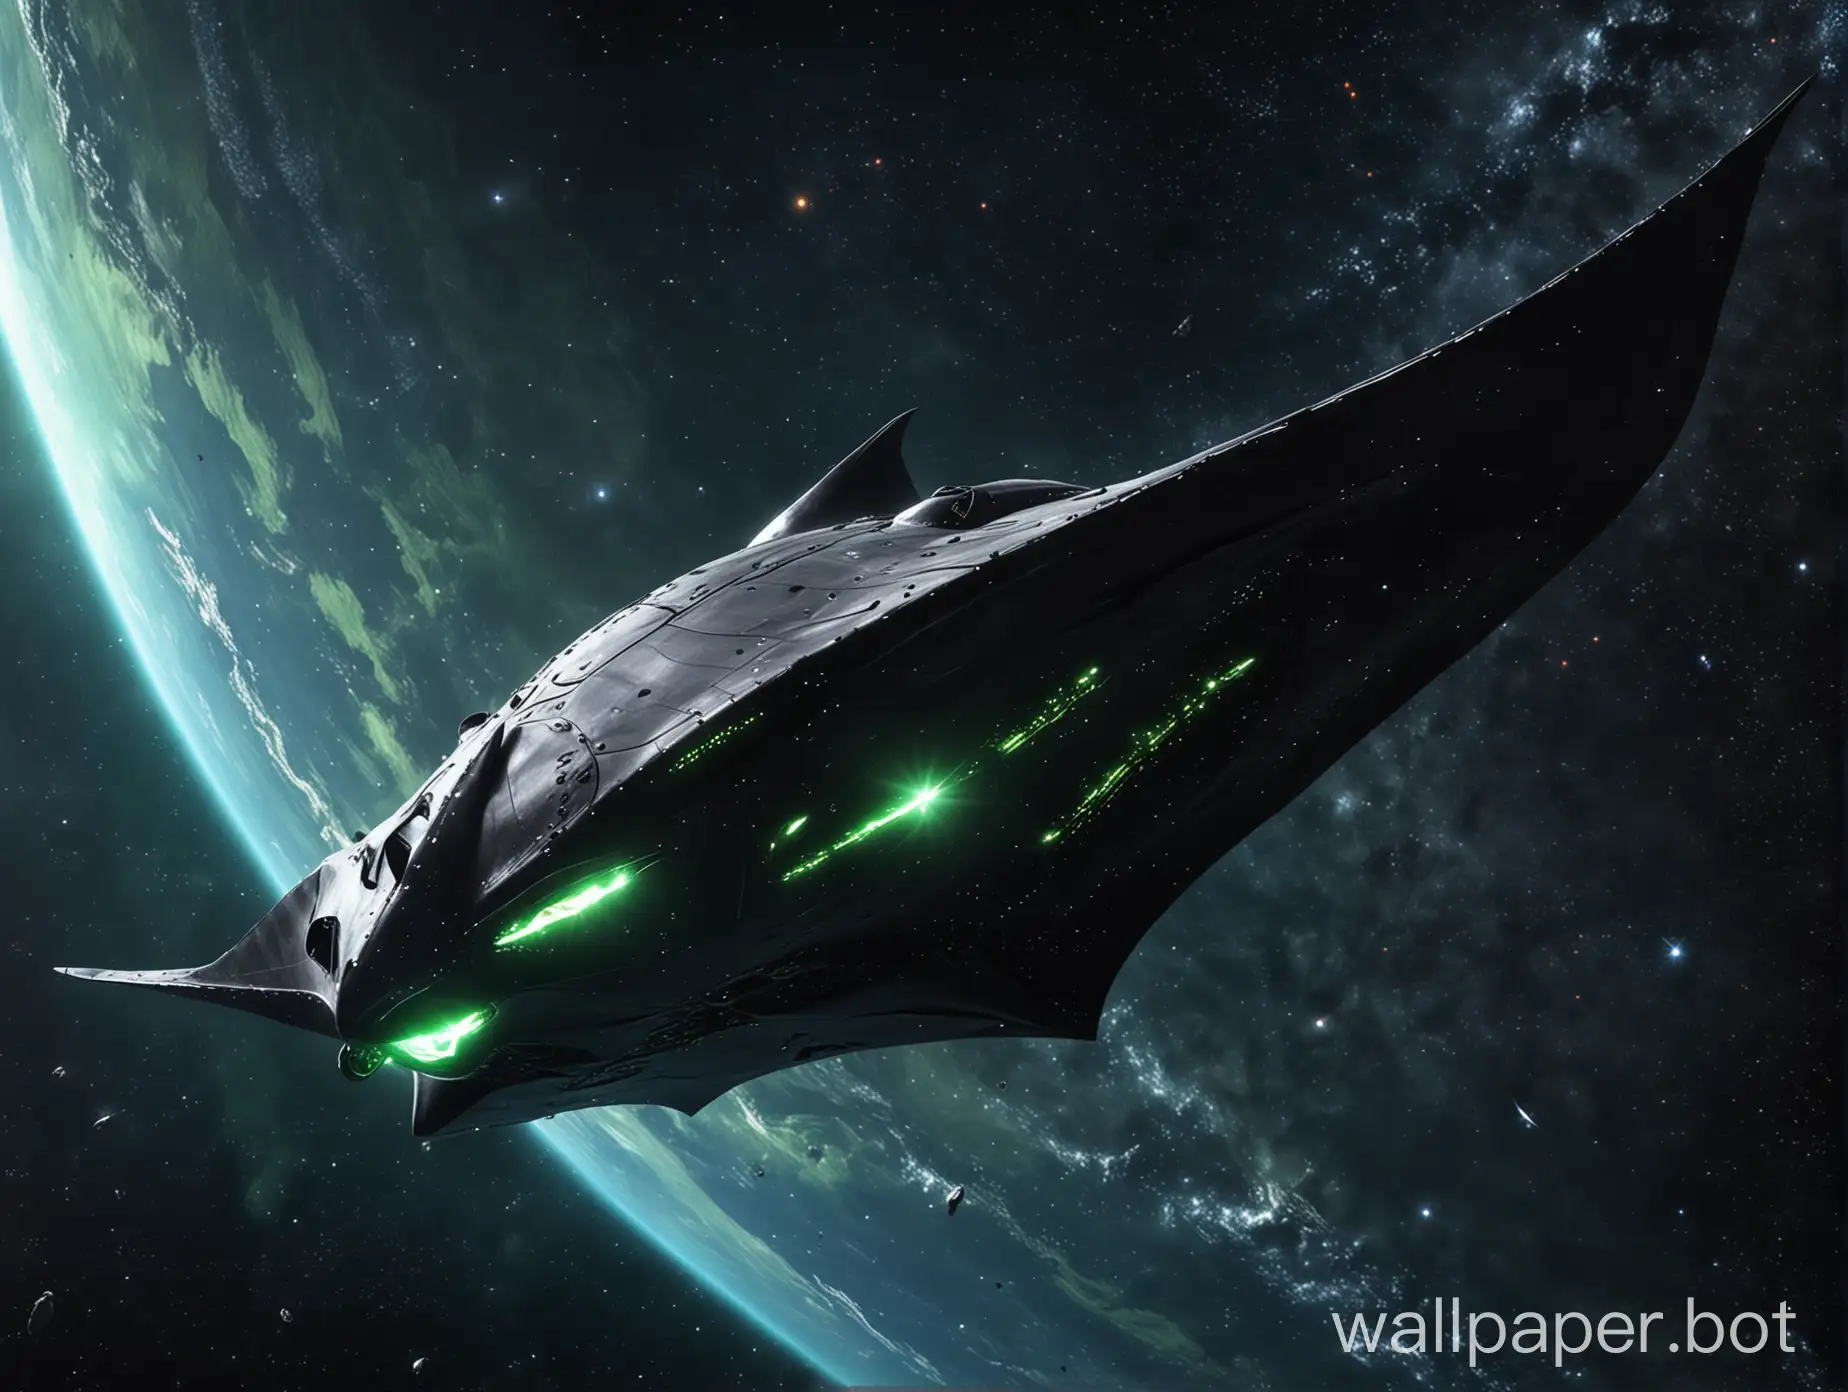 gigantic space ship in the shape of a manta ray flying in space, view from a distance, bright green star in the background, dark background, photorealism, in the genre of science fiction